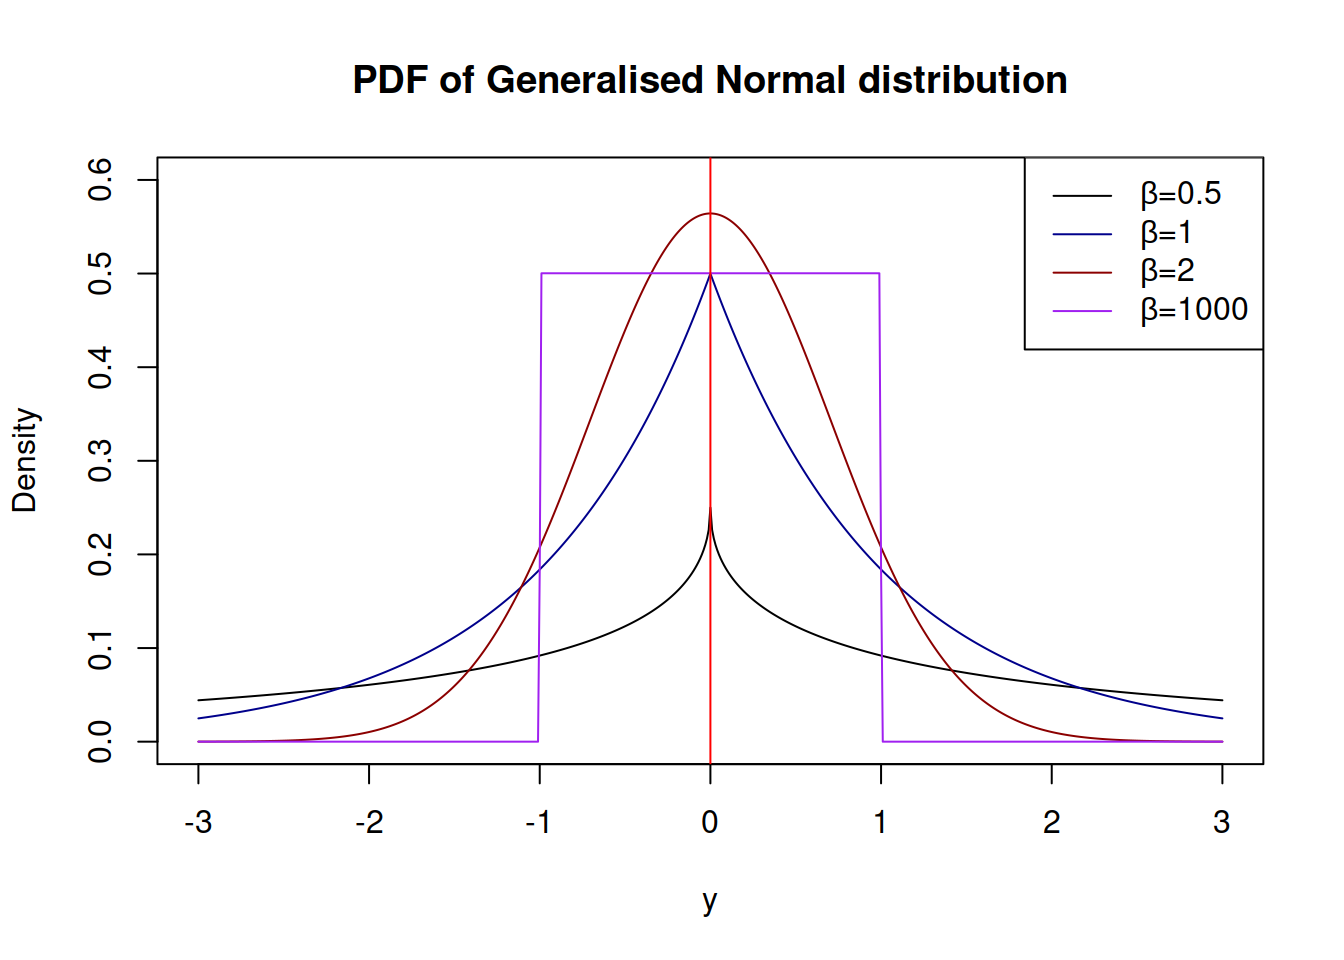 Probability Density Functions of Generalised Normal distribution